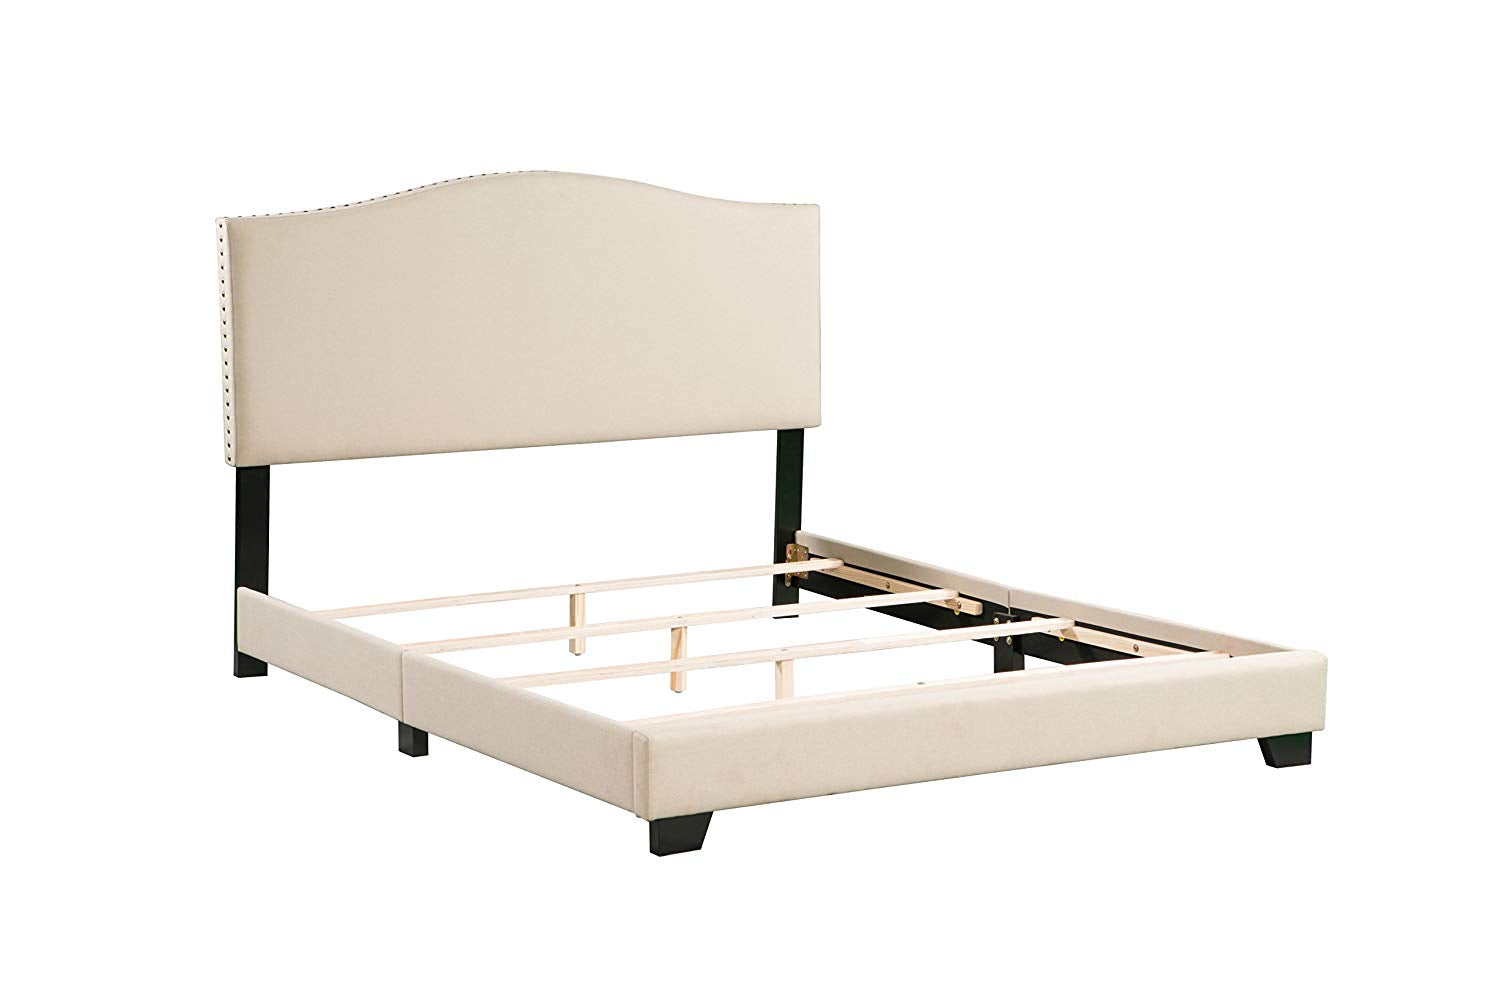 Boraam 95144 Dione Bed In A Box, Queen, Tan